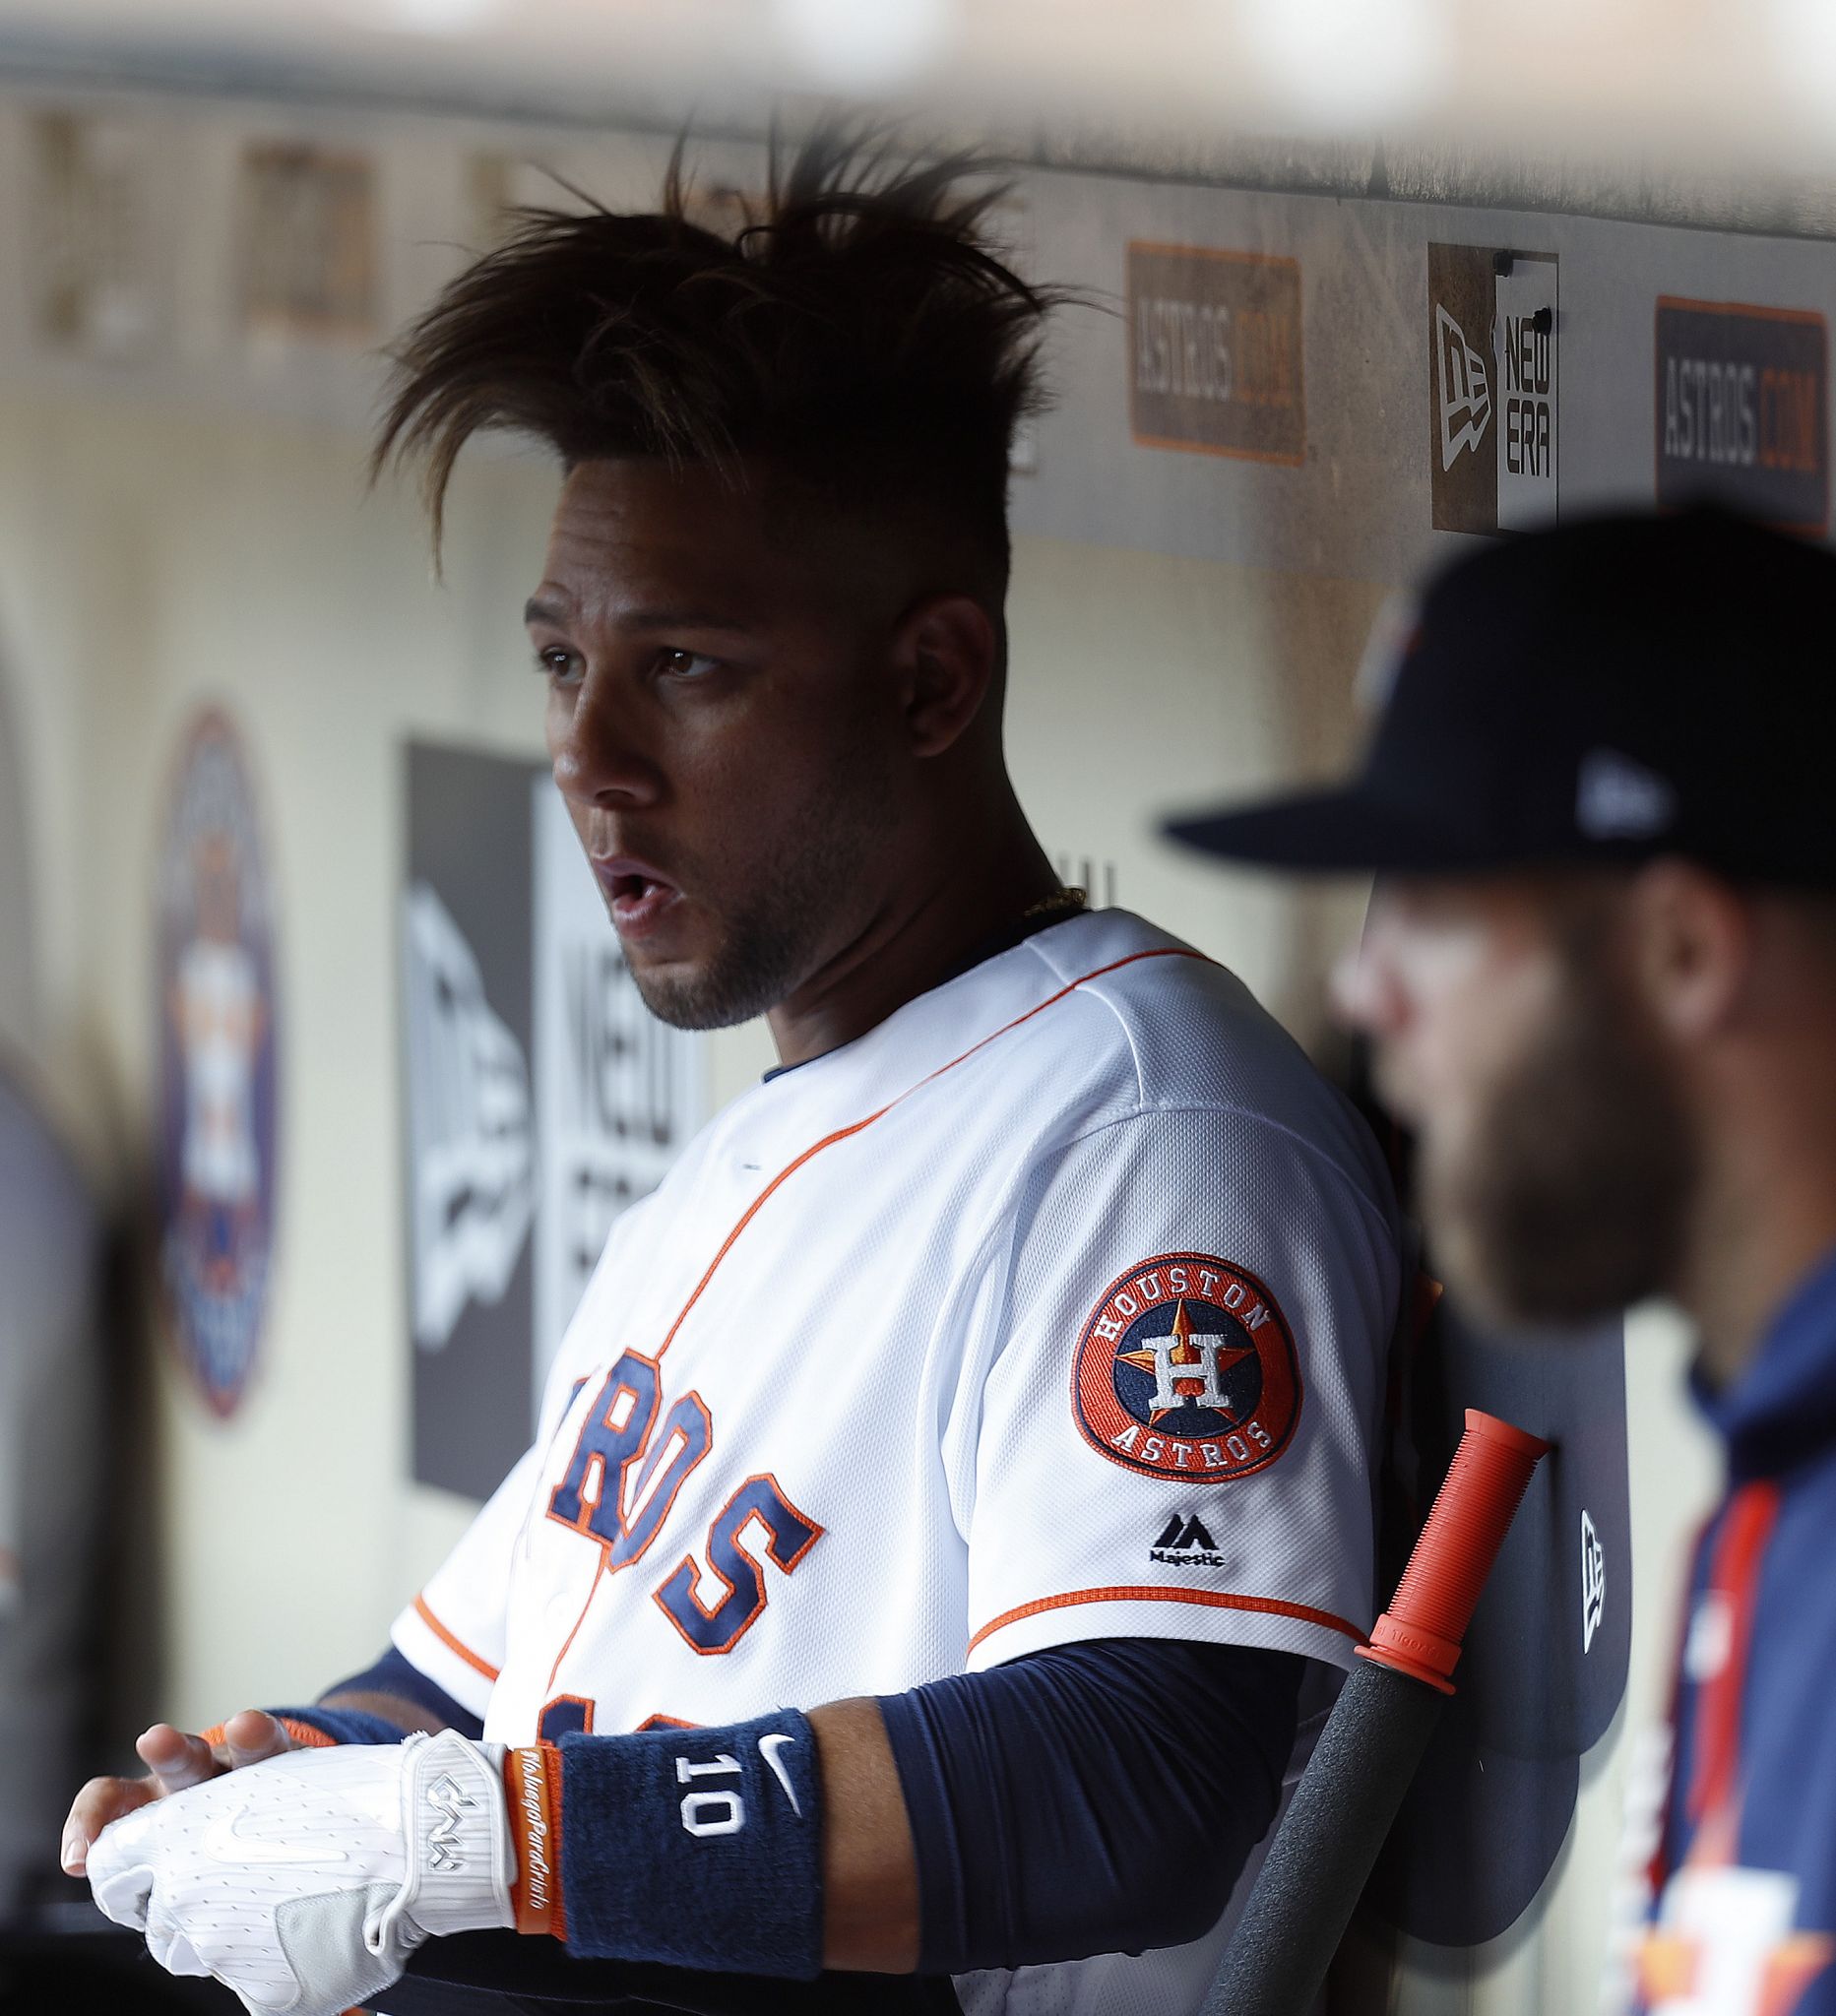 Luke Gregerson unravels in Astros' loss to Royals